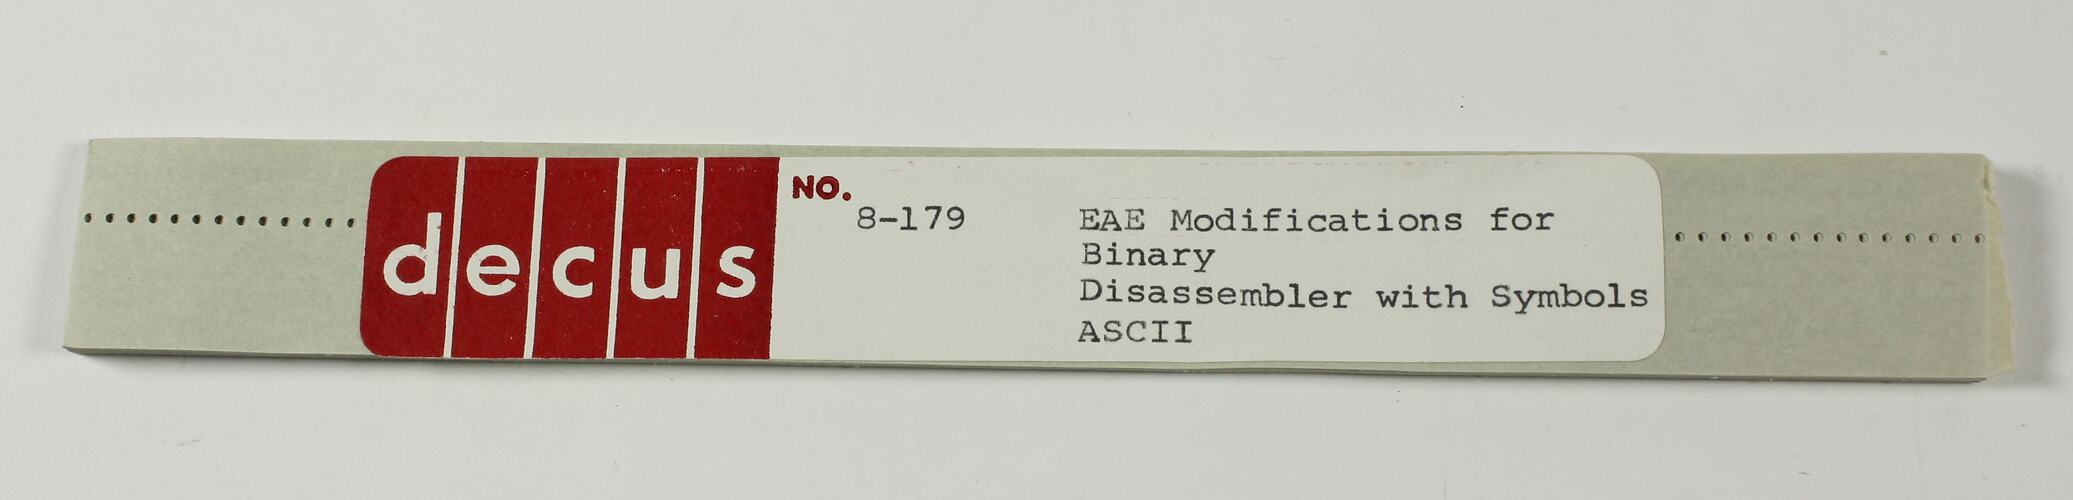 Paper Tape - DECUS, '8-179 EAE Modifications for Binary Disassembler with Symbols, ASCII'